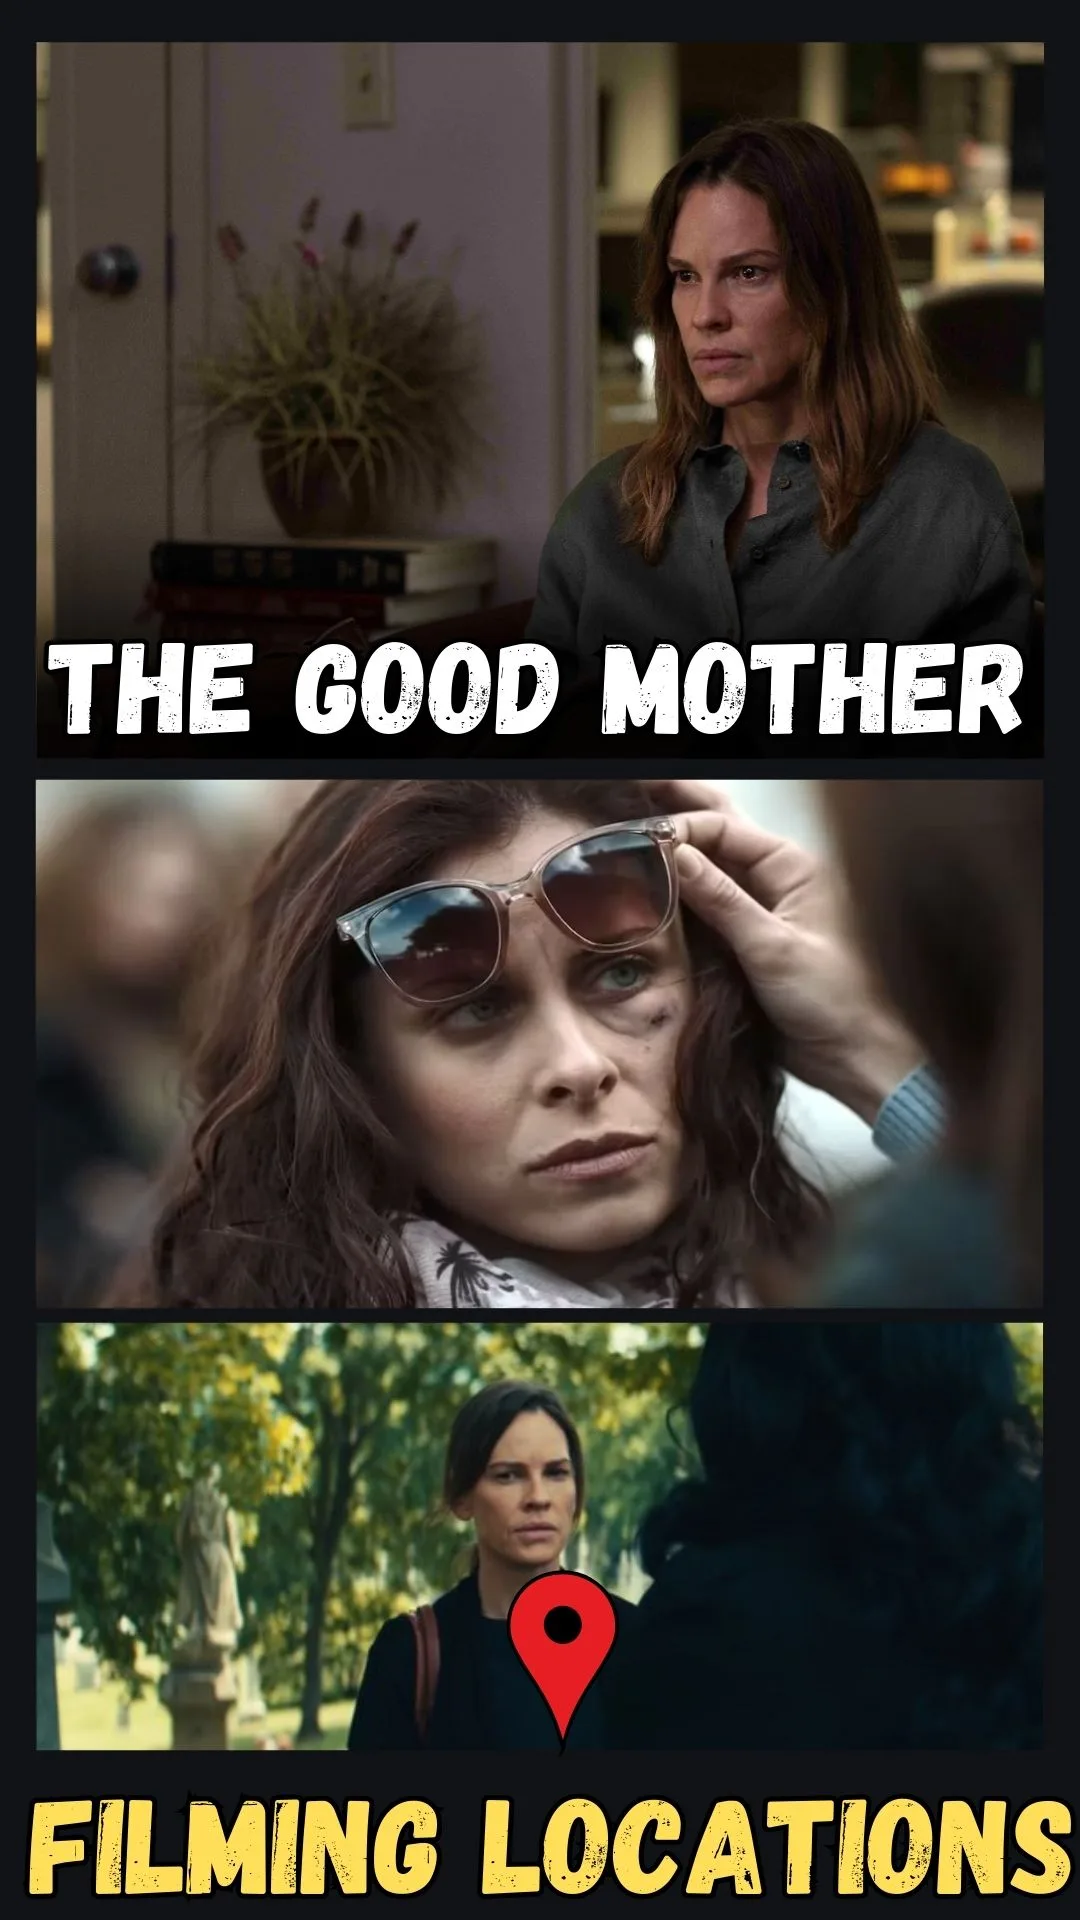 The Good Mother Filming Locations